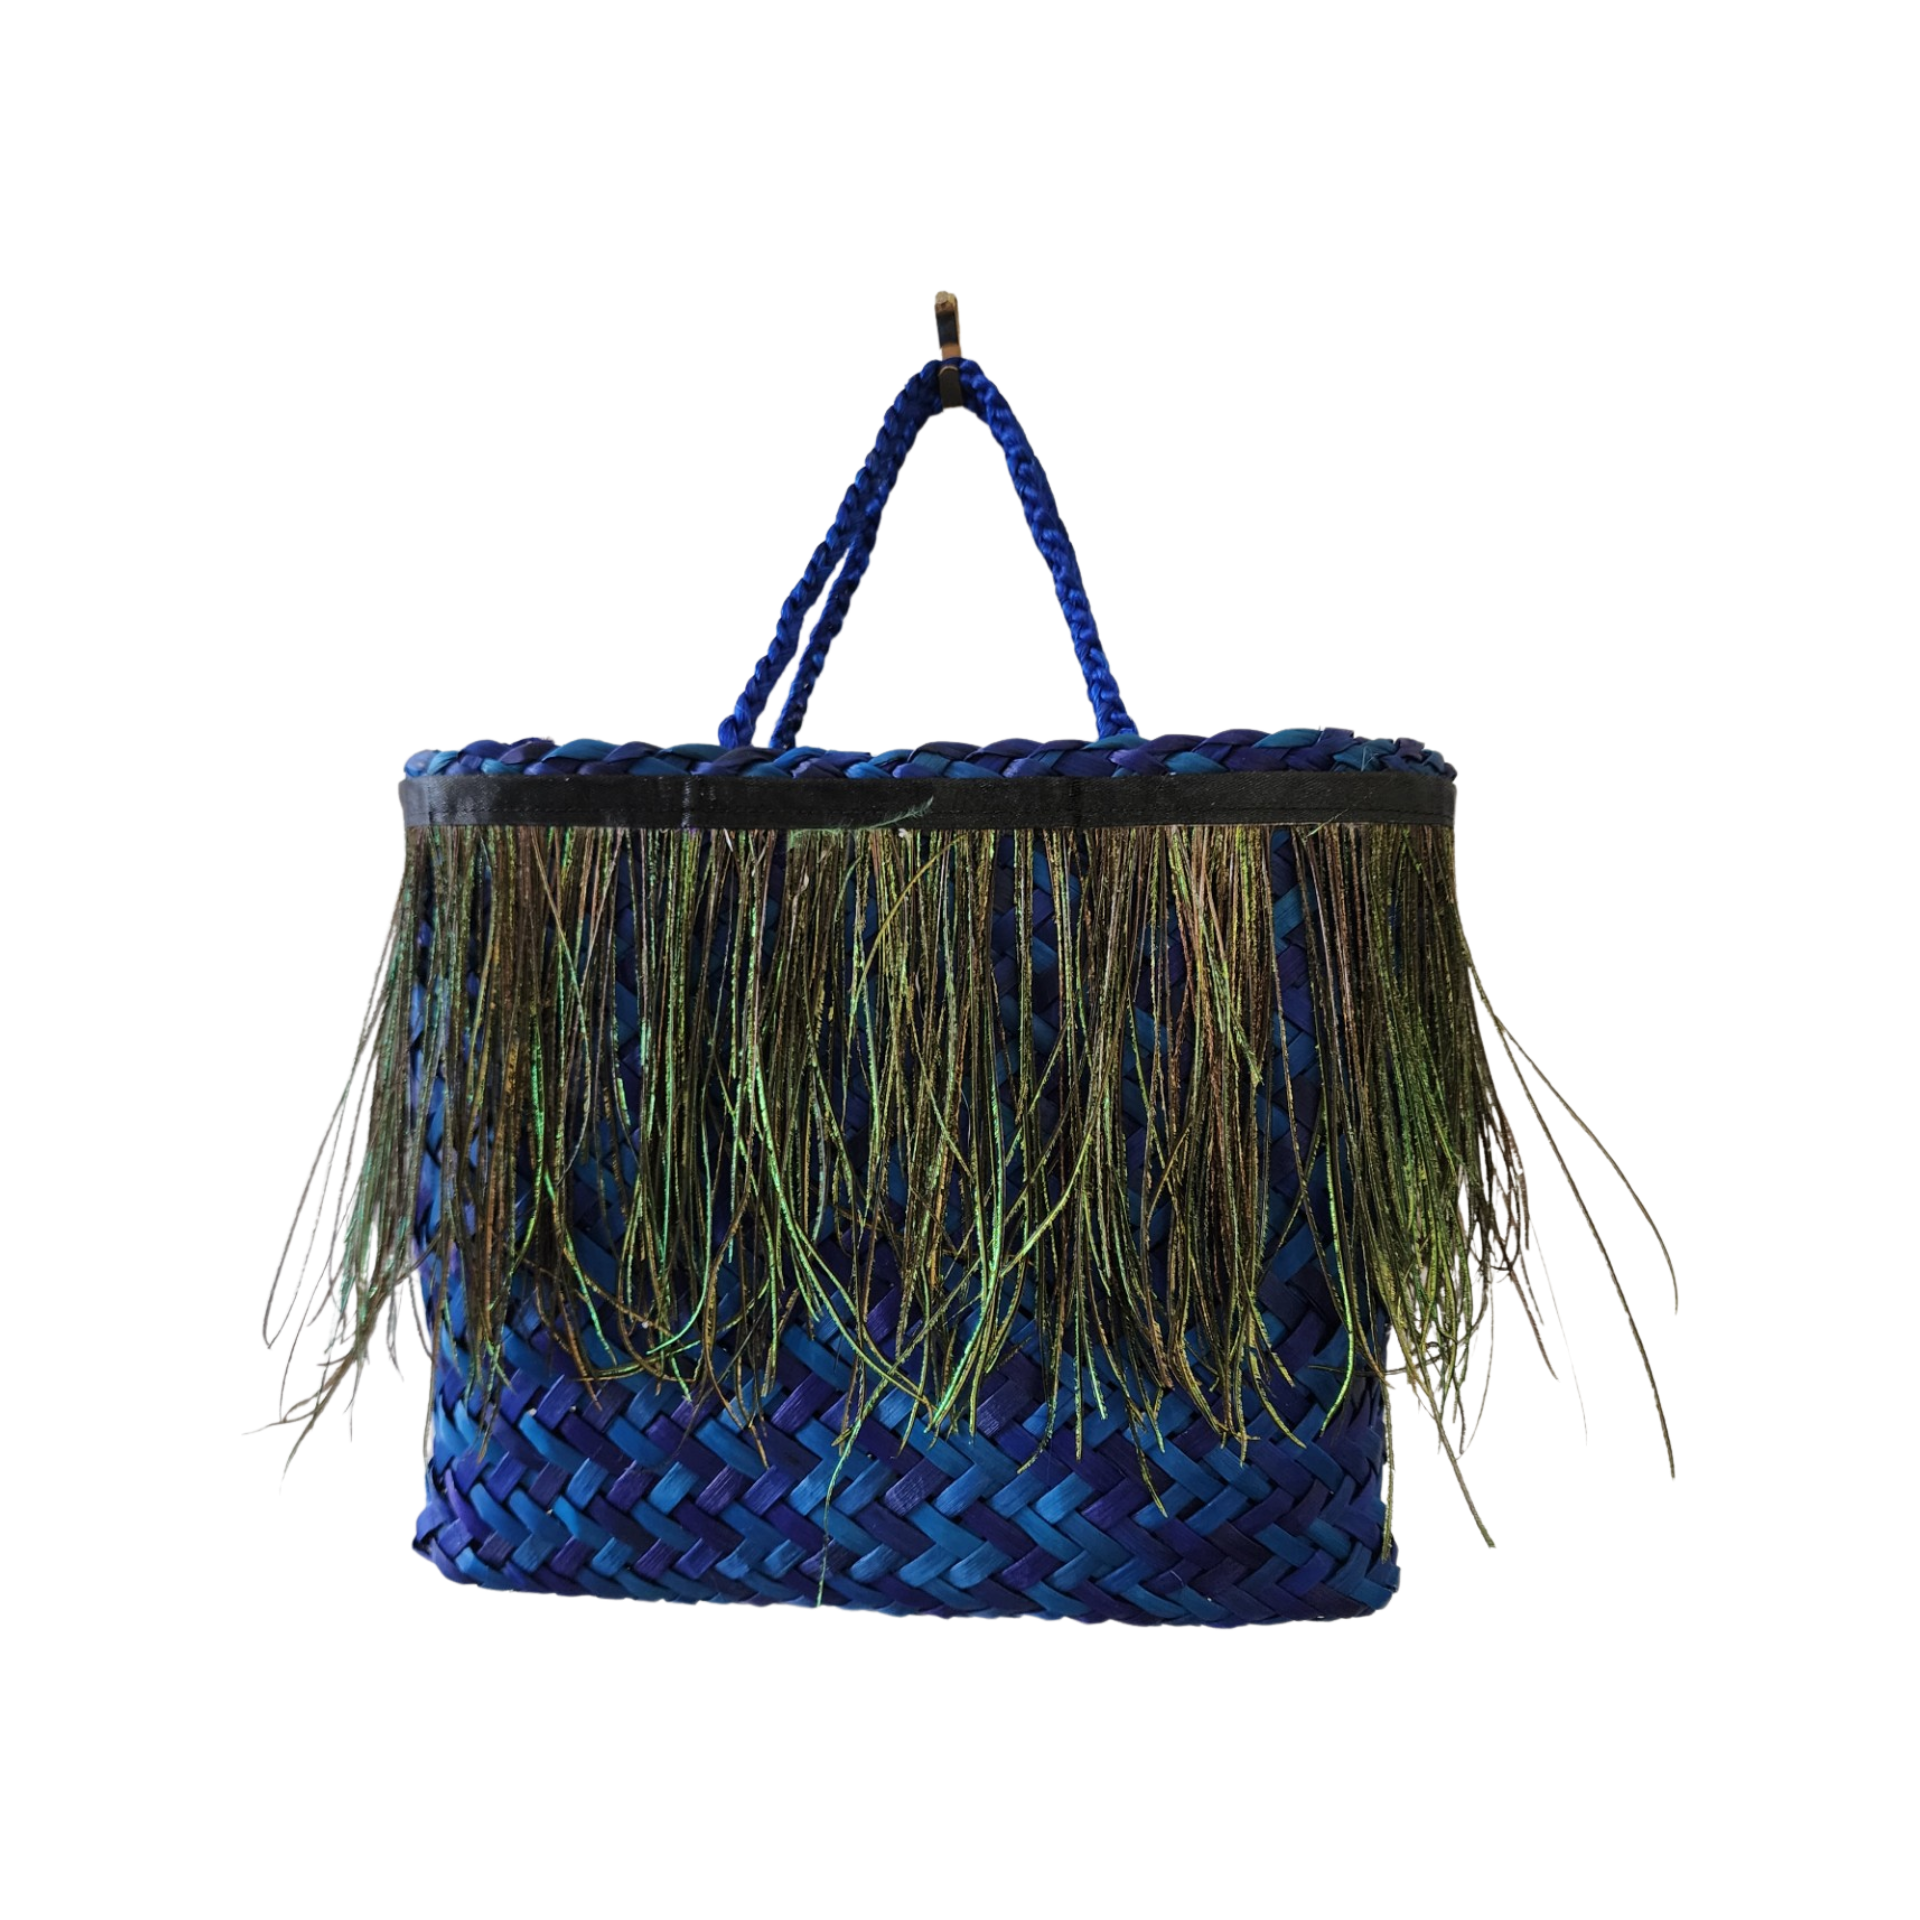 Kete blue with Peacock feathers Small